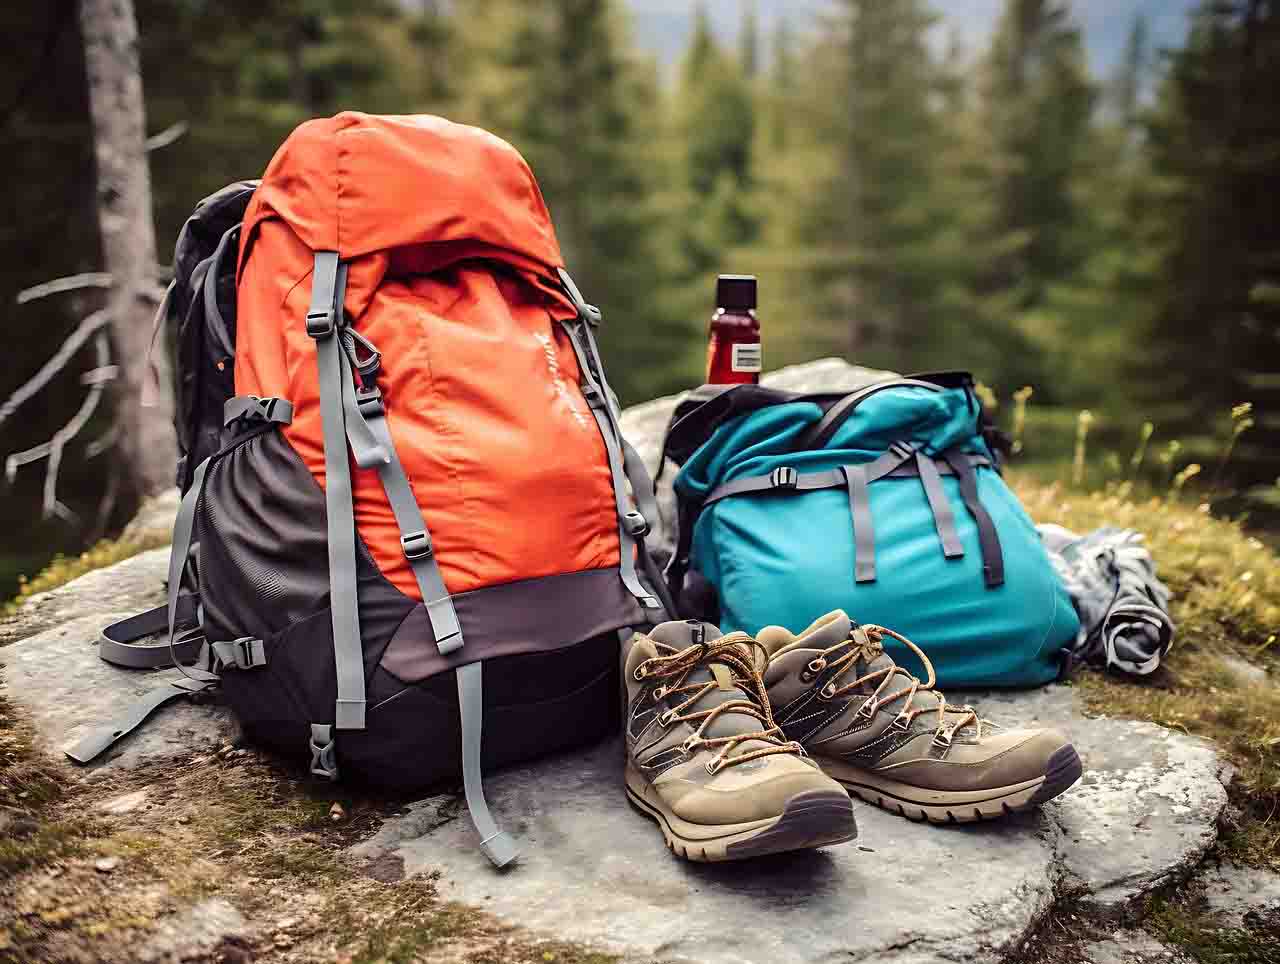 Backpacking Essentials: All the Gear You Need for a Backpacking